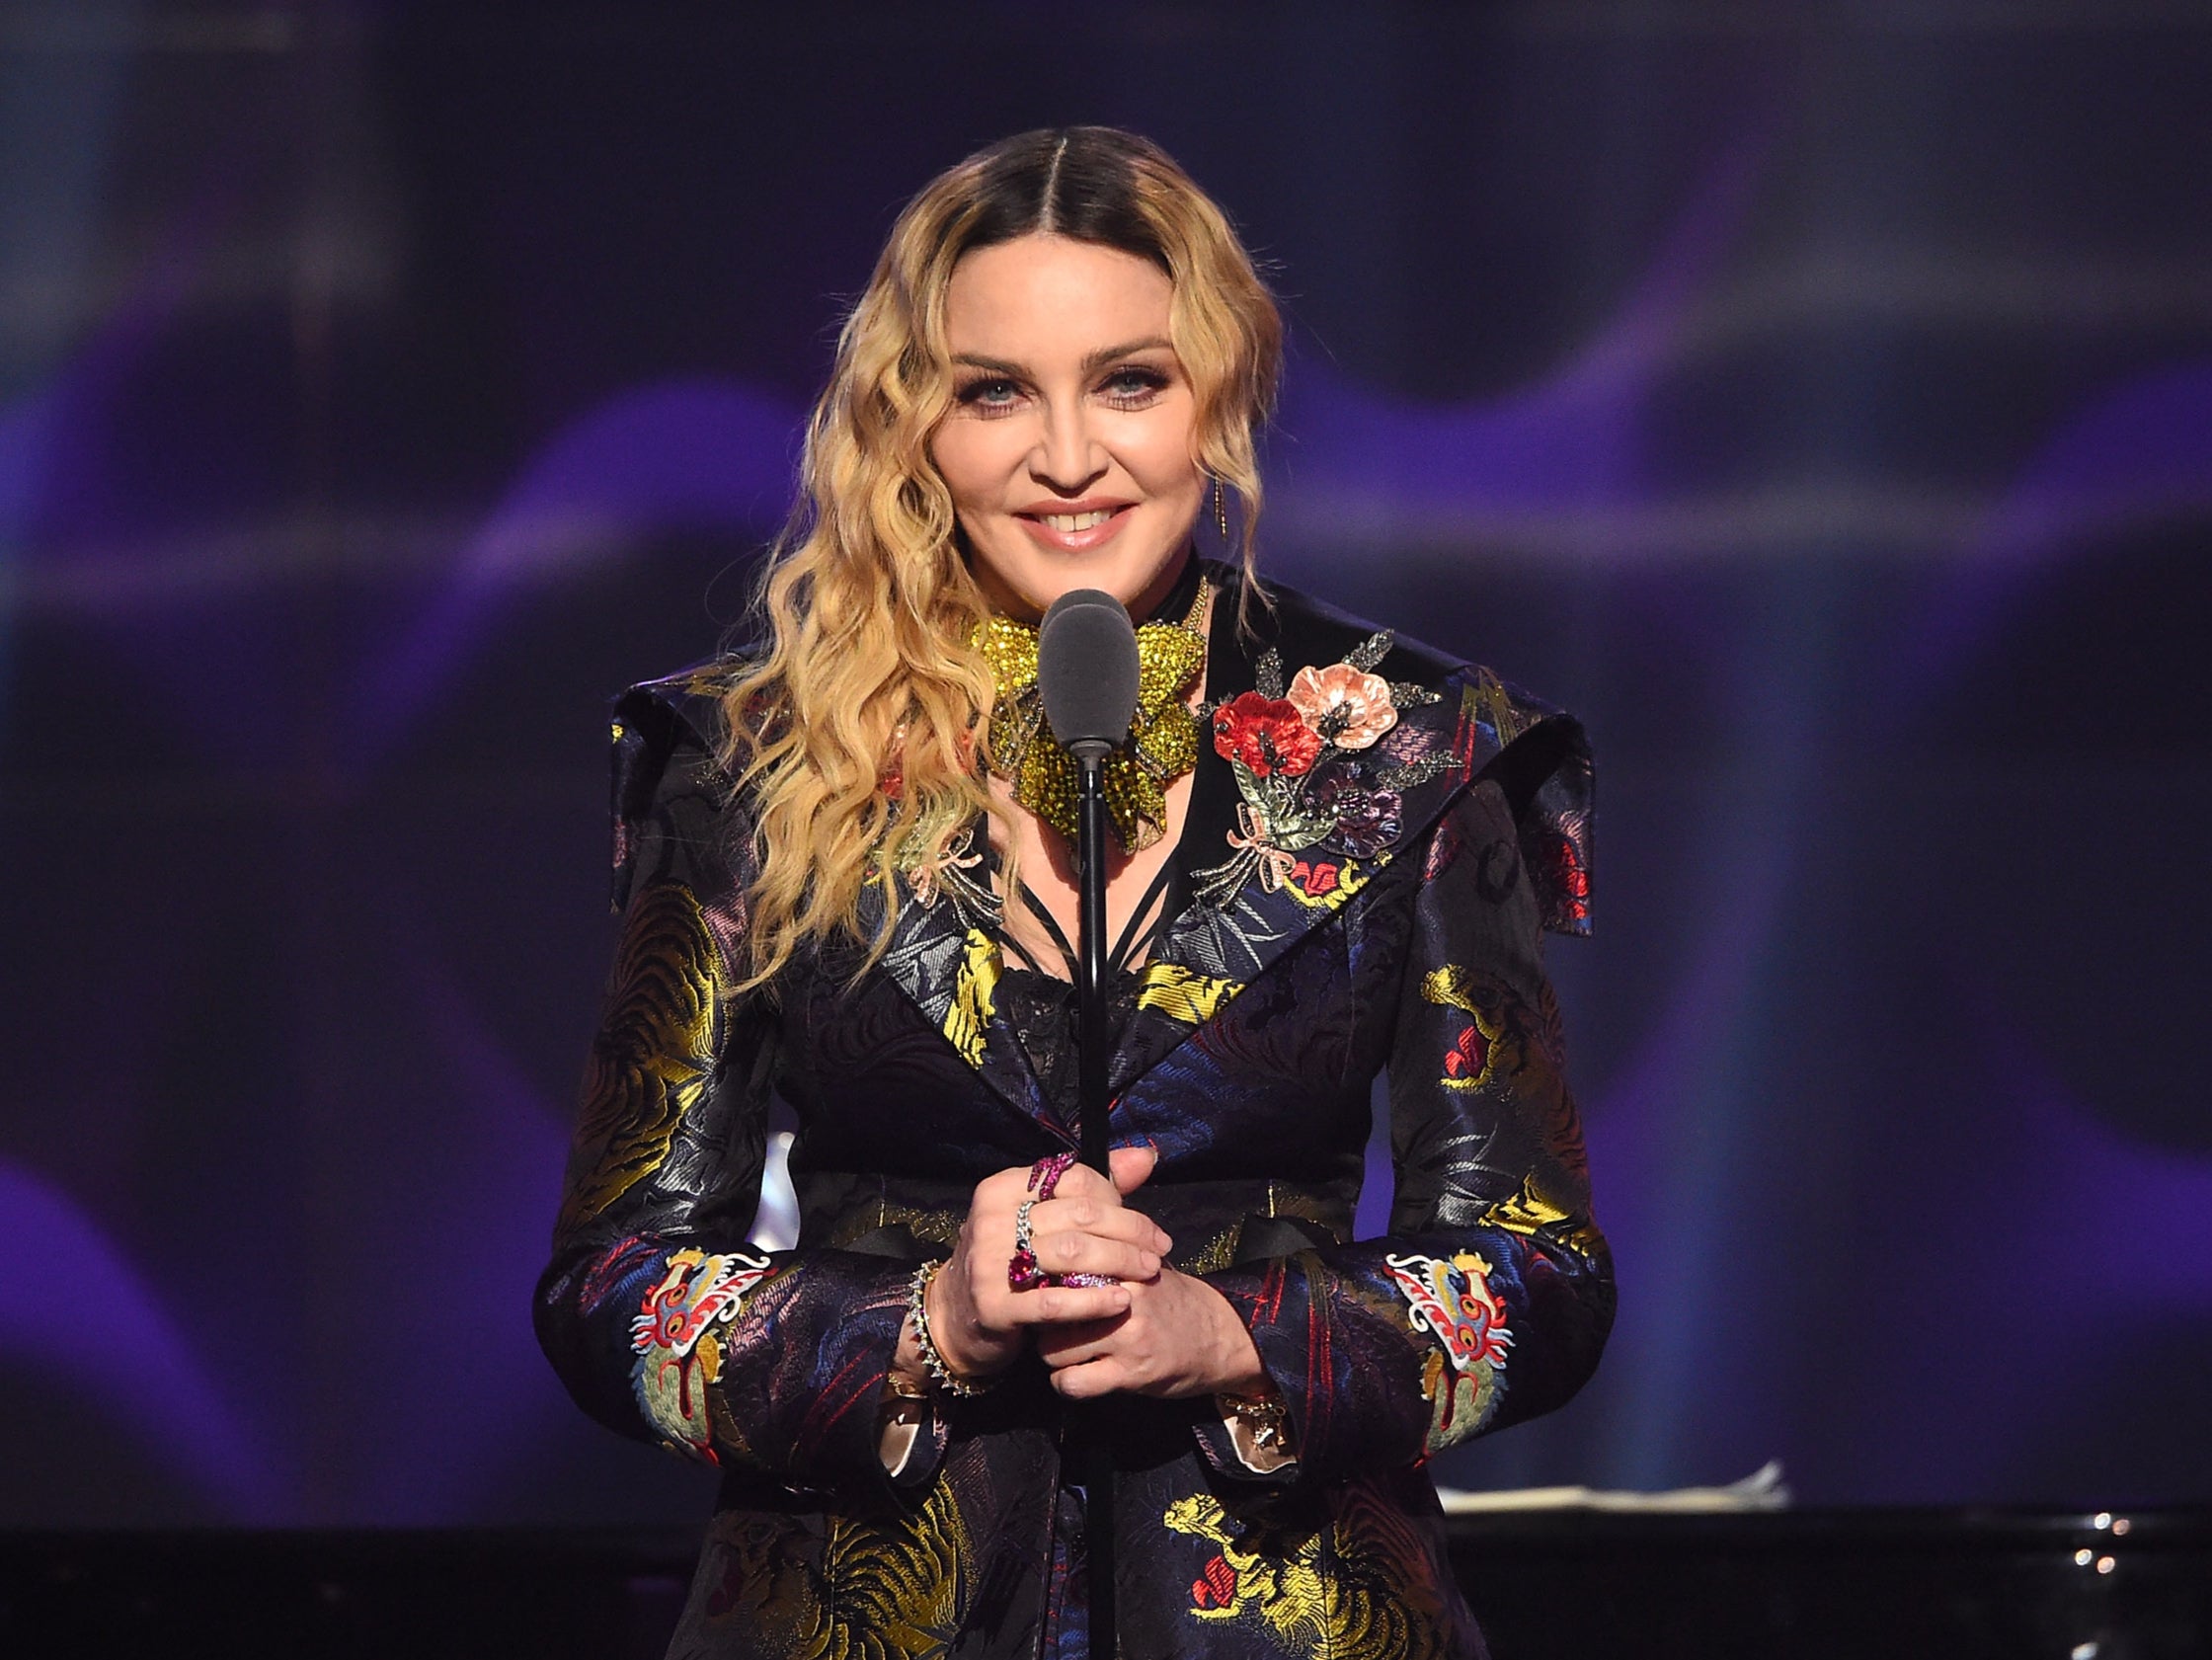 Madonna is nearing the end of her 80-date greatest hits tour